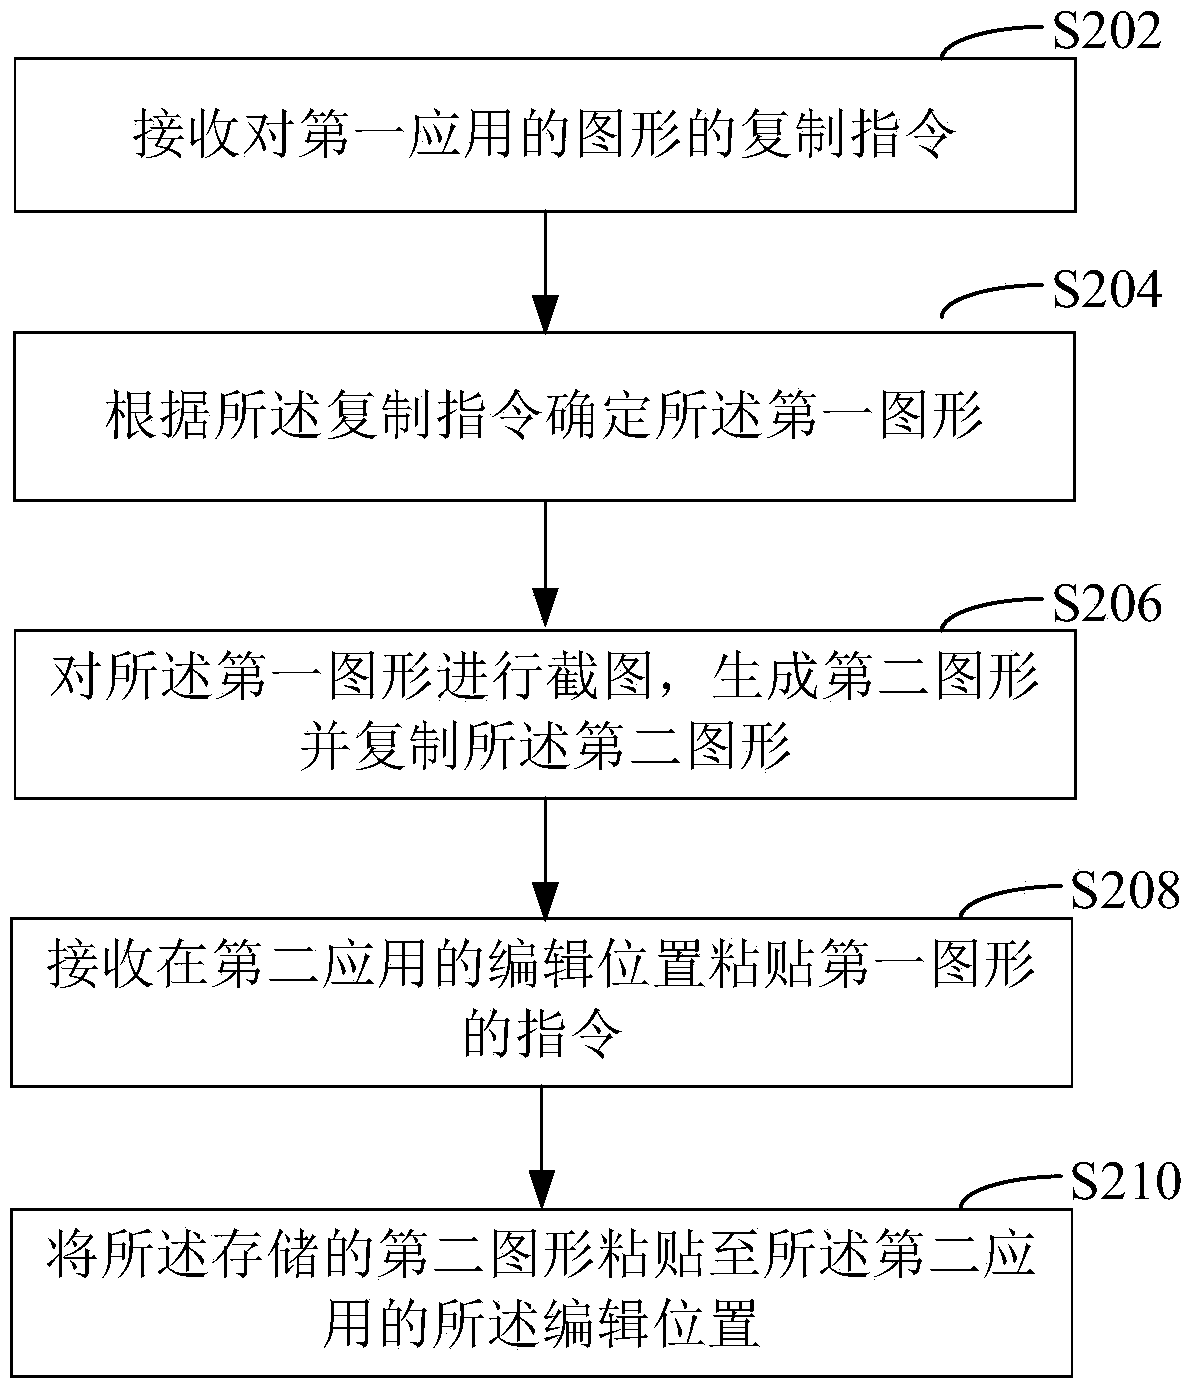 Method and device for transferring data across applications